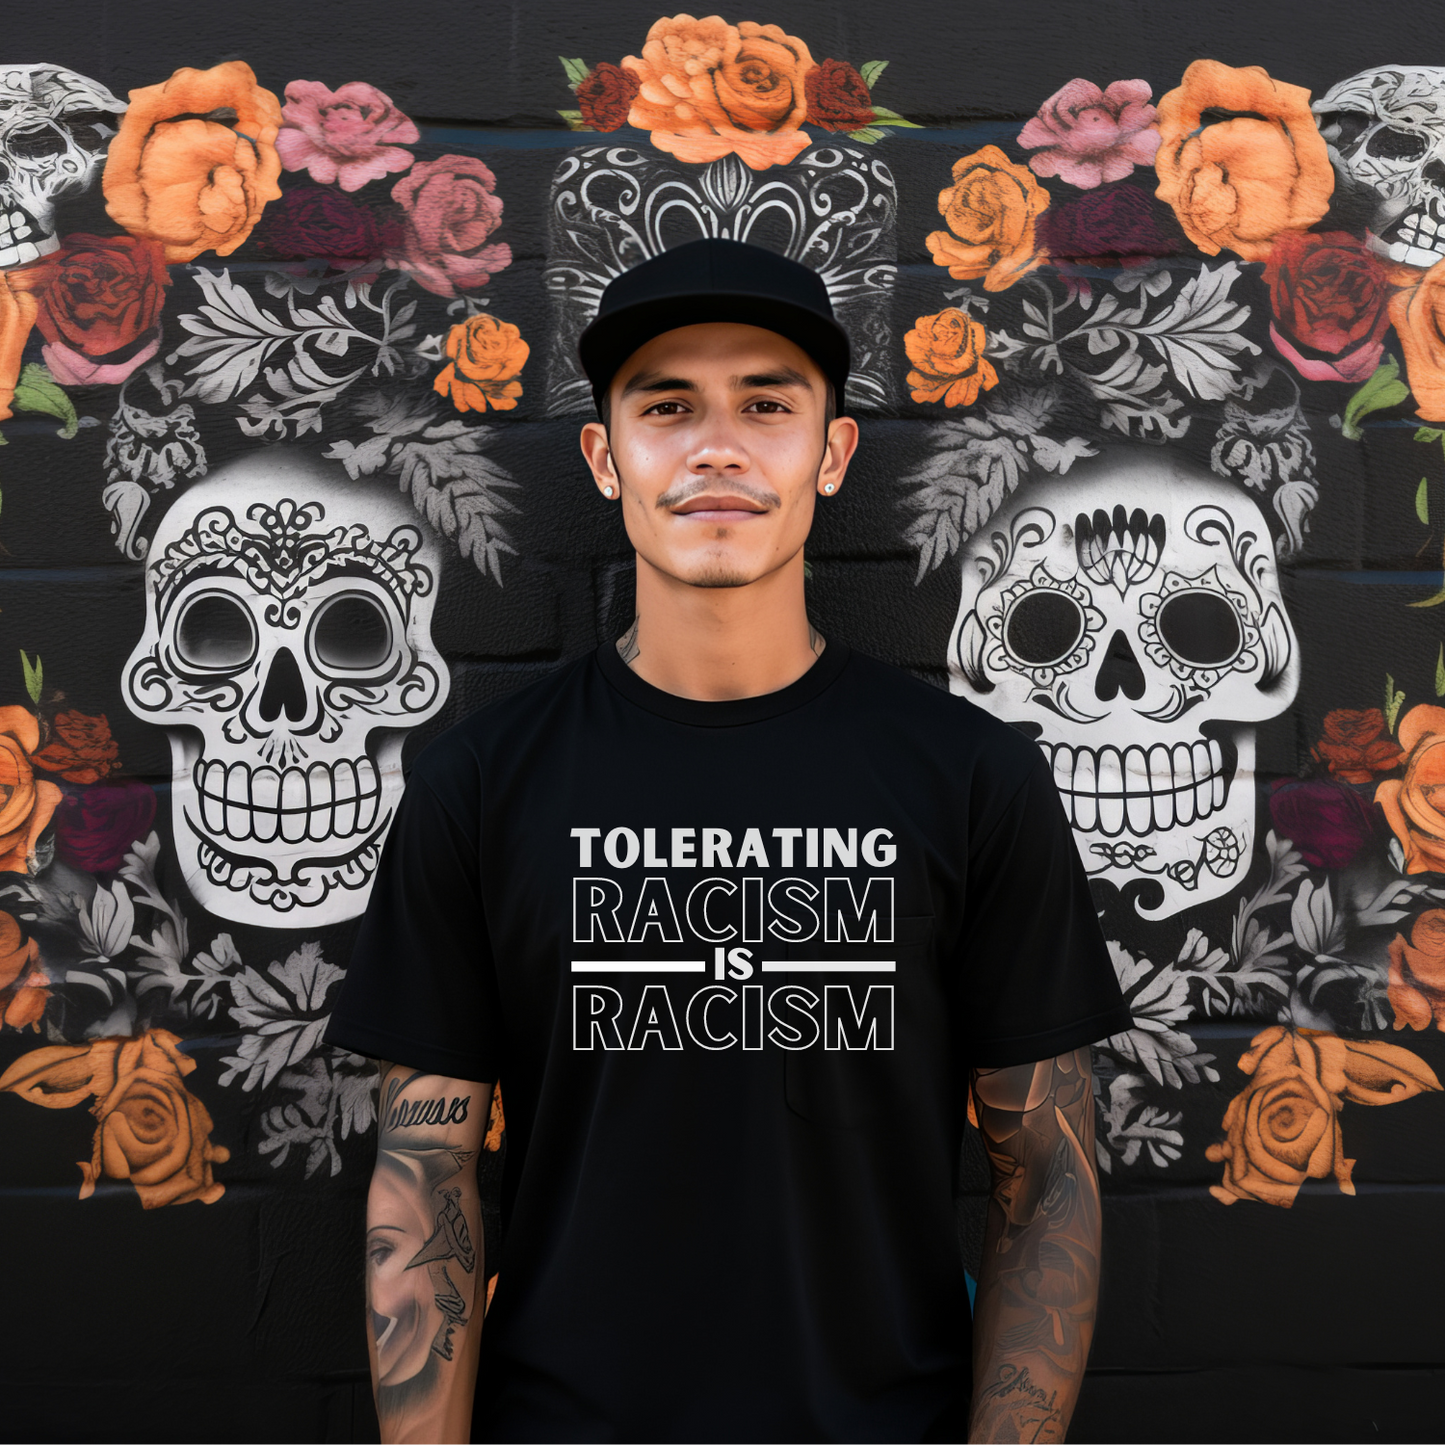 Impactful t-shirt to spread a message of resistance against discrimination - "tolerating racism is racism". Bella Canvas 3001 tee in black.